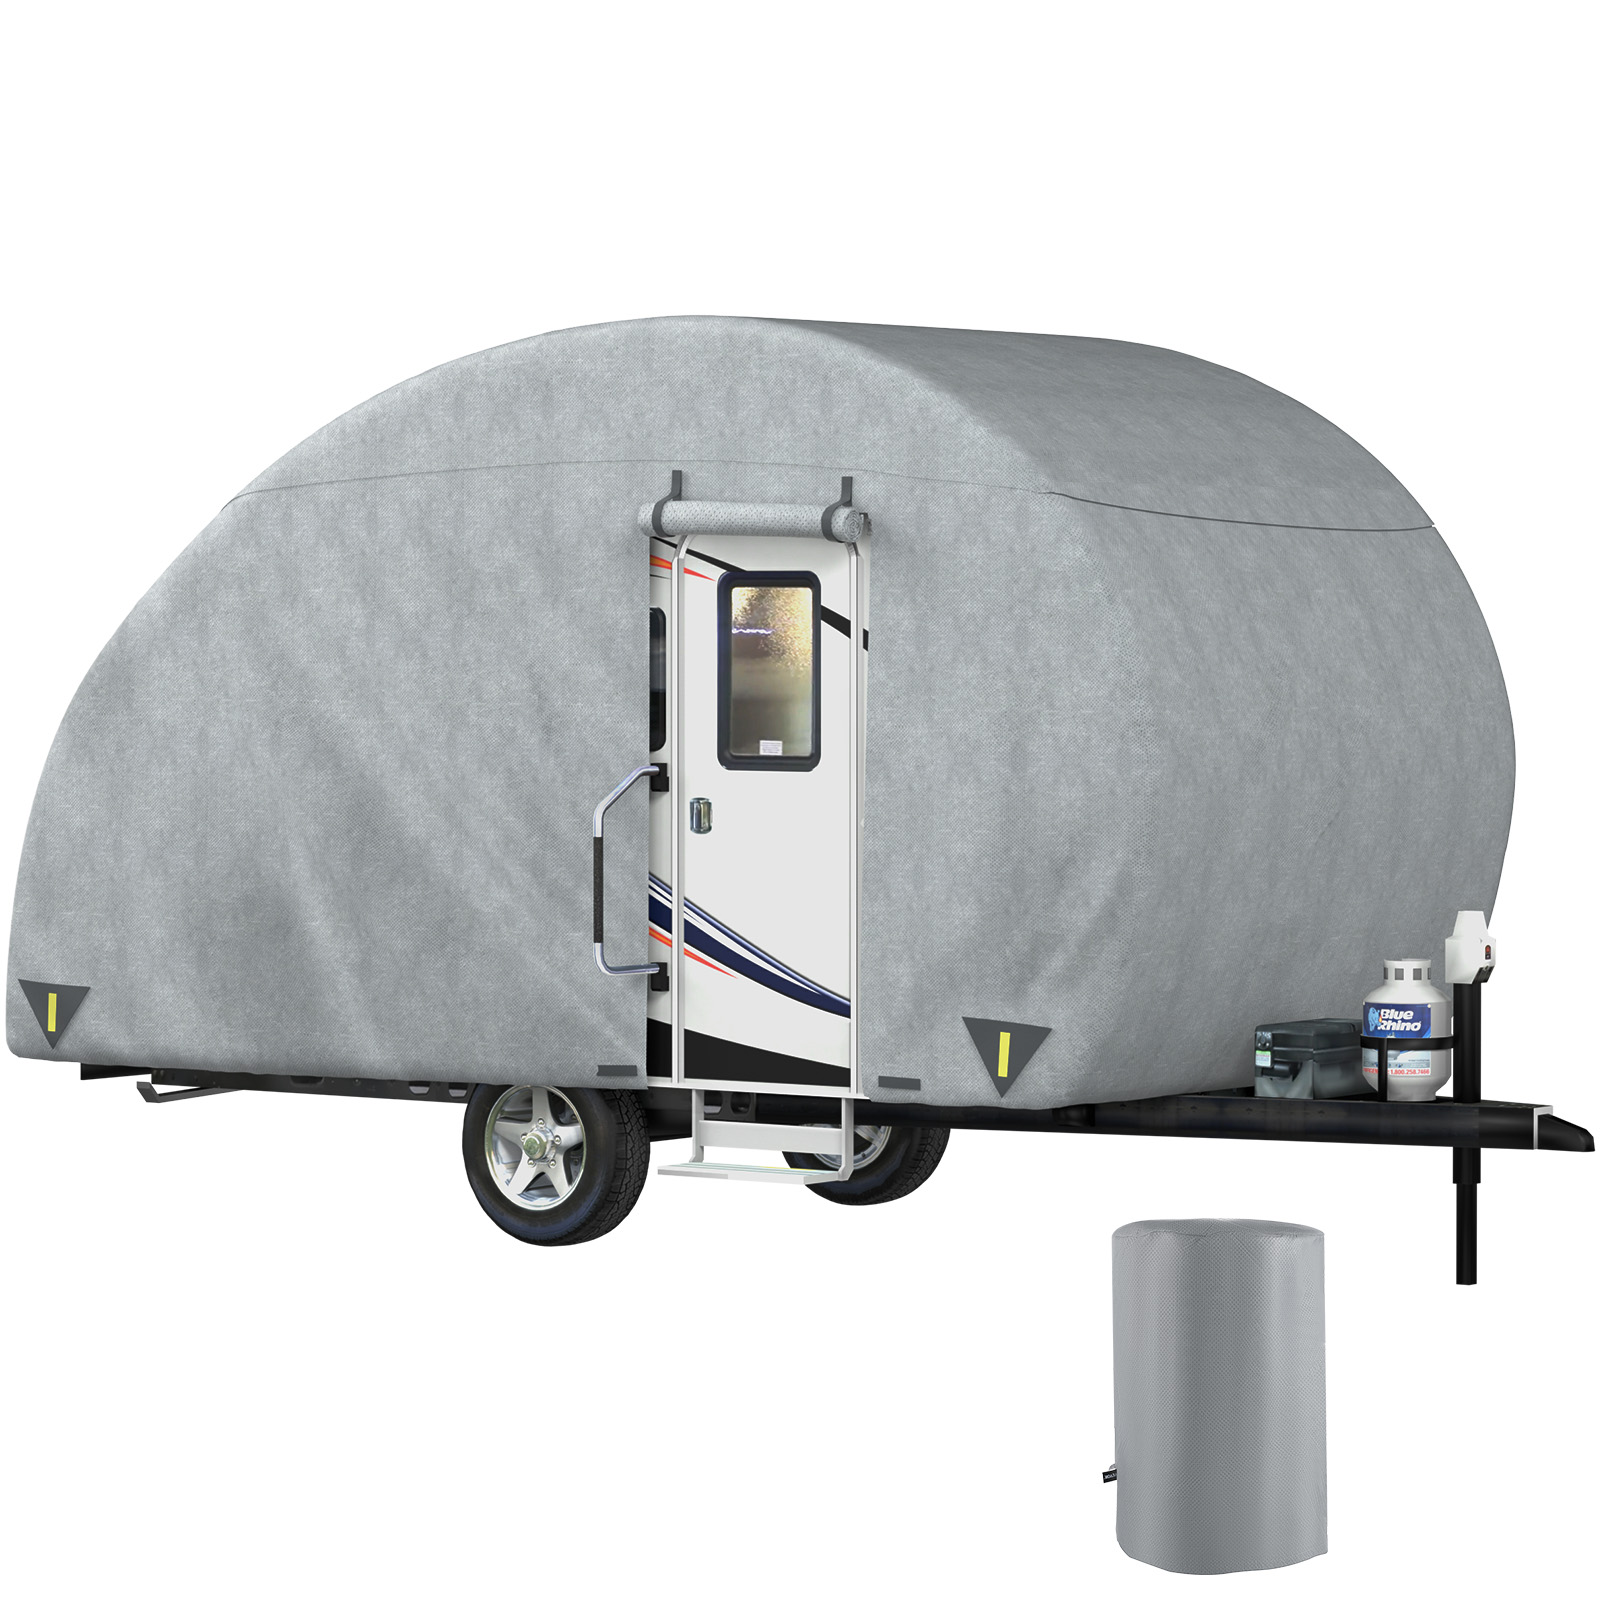 VEVOR VEVOR Teardrop Trailer Cover, Fit for 18' 20' Trailers, Upgraded Non -Woven Layers Camper Cover, UV-proof Waterproof Travel Trailer Cover w/  Wind-proof Straps and Storage Bag VEVOR UK